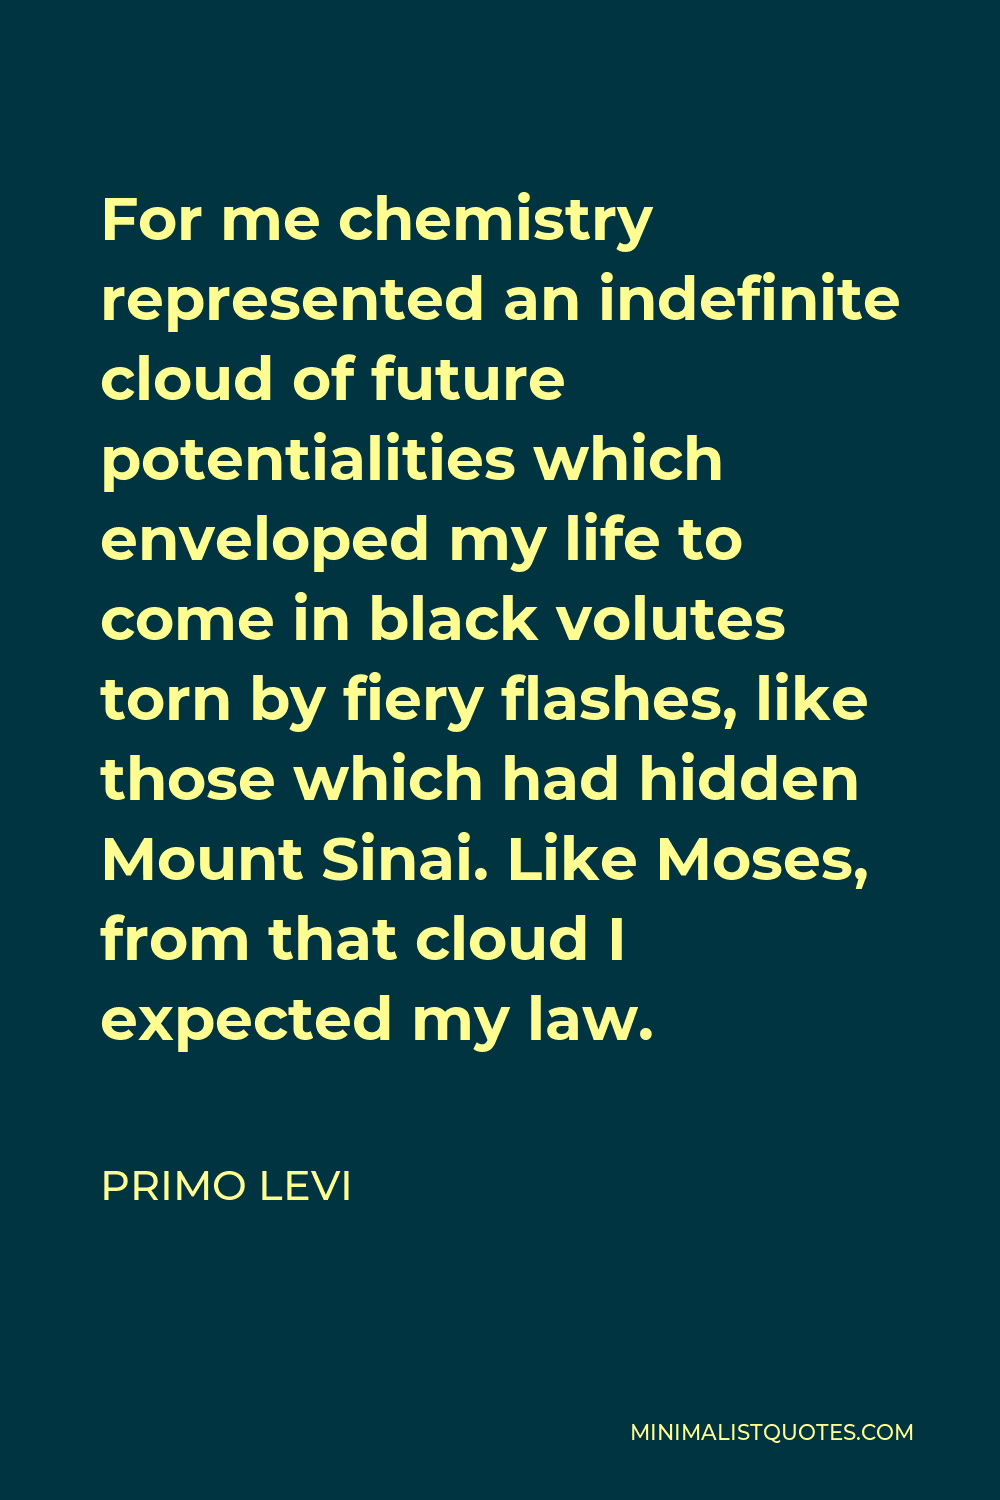 Primo Levi Quote - For me chemistry represented an indefinite cloud of future potentialities which enveloped my life to come in black volutes torn by fiery flashes, like those which had hidden Mount Sinai. Like Moses, from that cloud I expected my law.